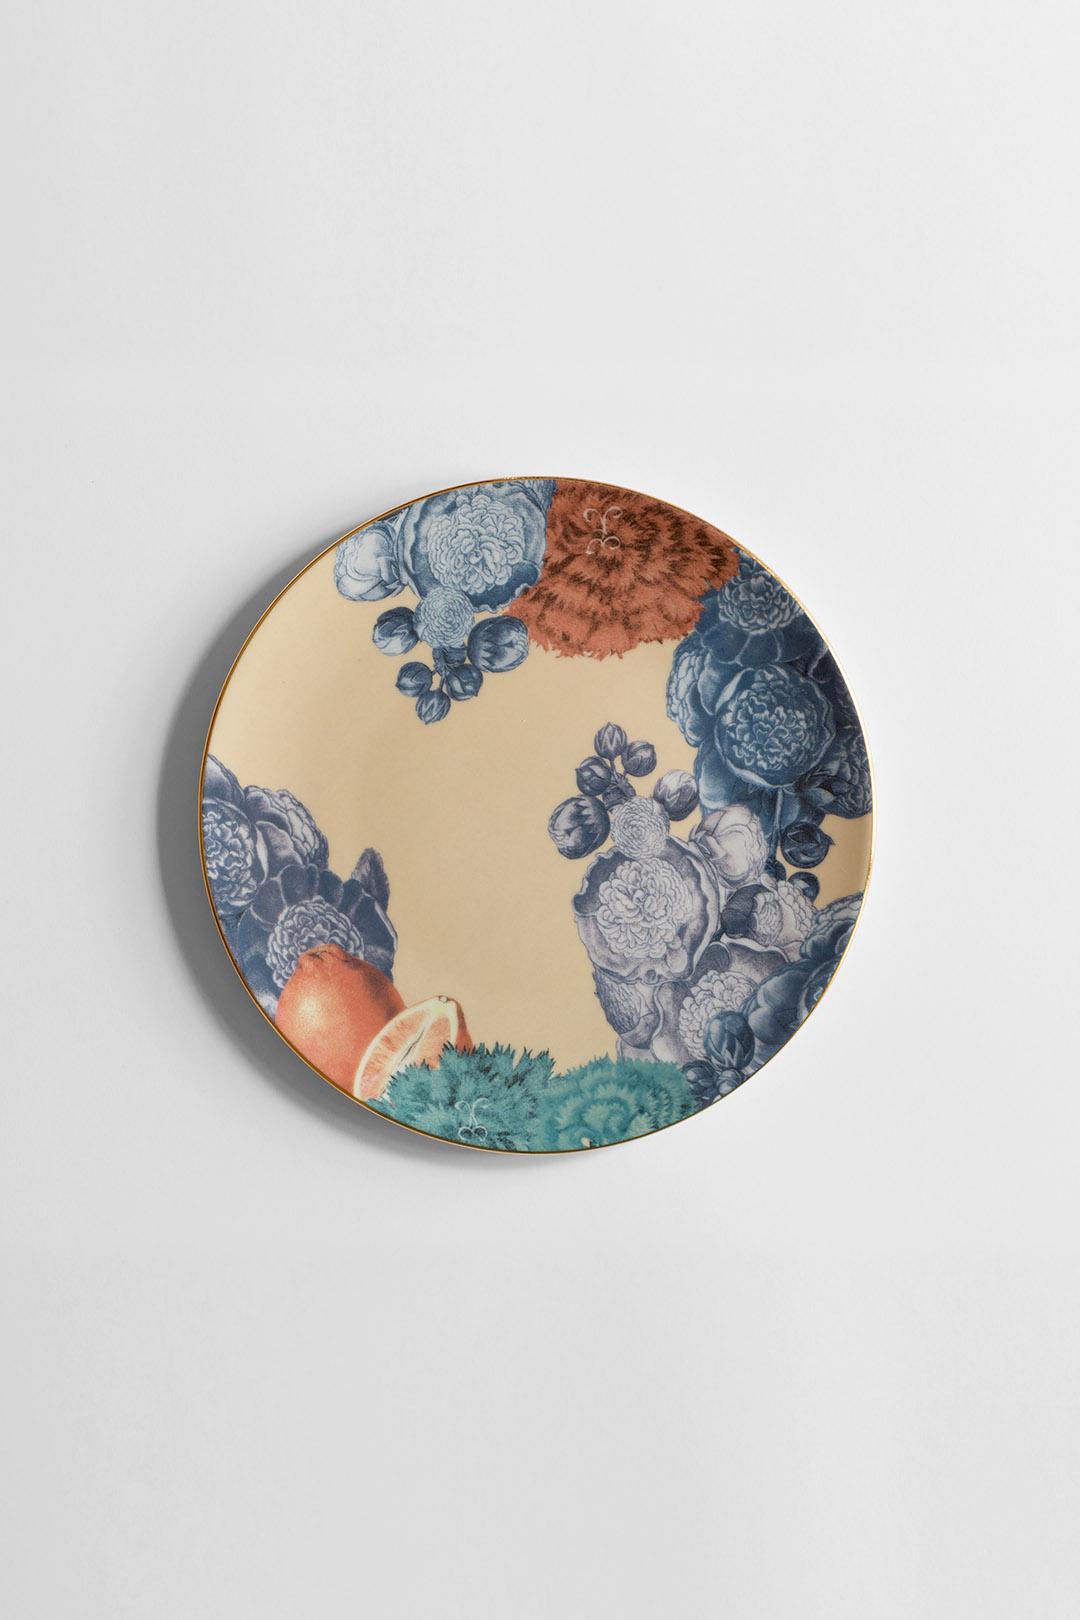 Handmade in Italy, designed by Vito Nesta. 

The set of 6 porcelain dinner plates represent beautiful images of flowers from Cairo

Measures: 21 cm diameter

Handmade in Italy.
 